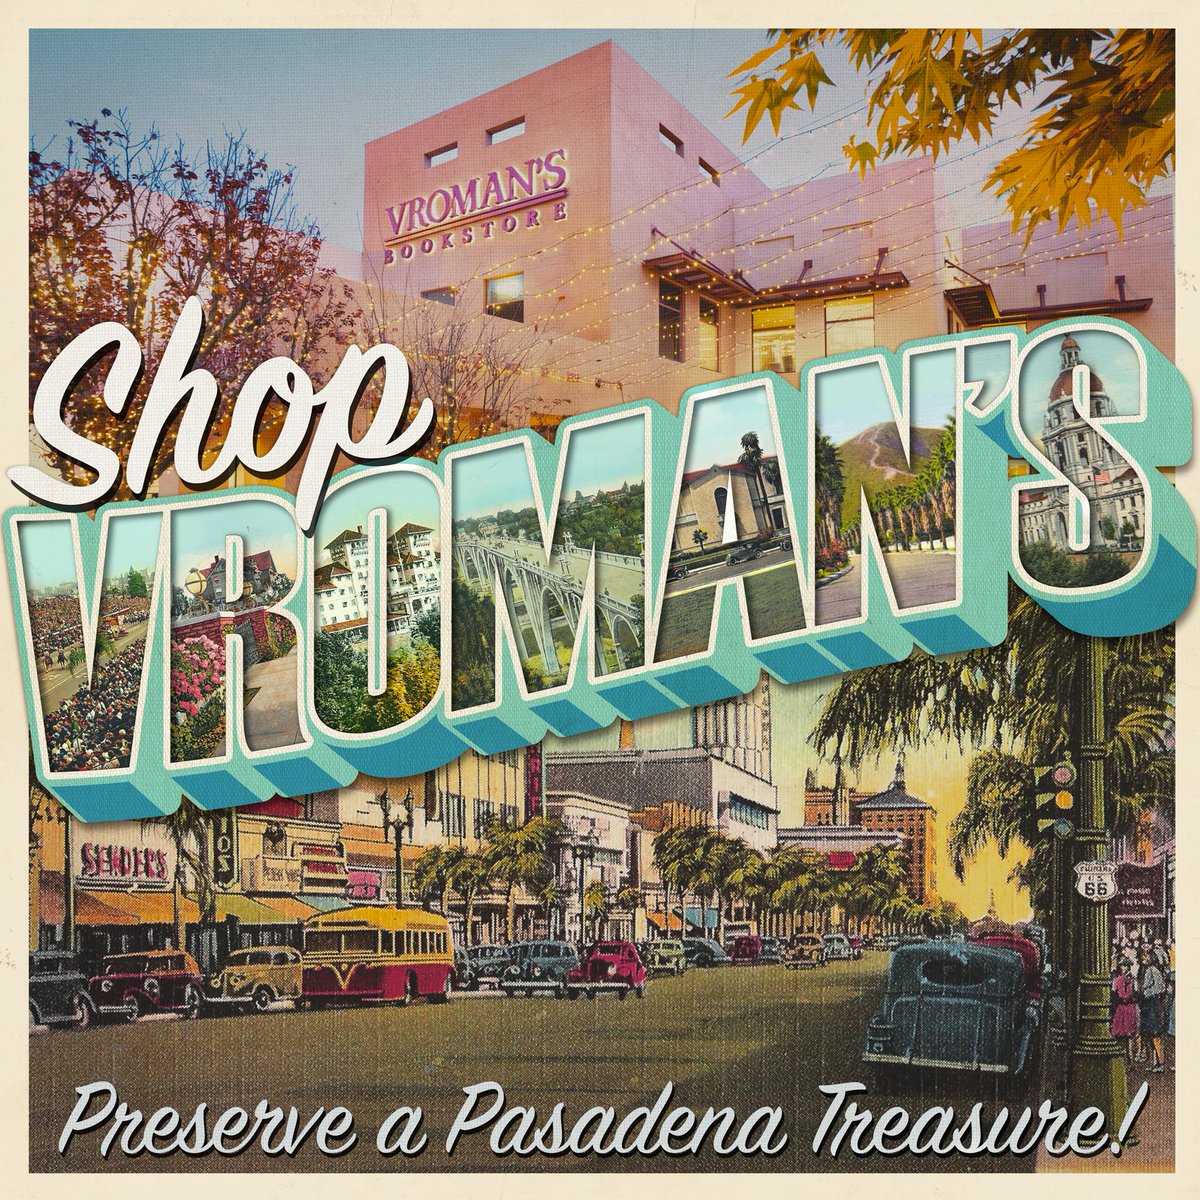 (4/5) We also need your help to get the word out! Reach out to your friends & contacts. Save this shareable, use the hashtag  #ShopVromans & post on your social media accounts. Don't forget to tag us!